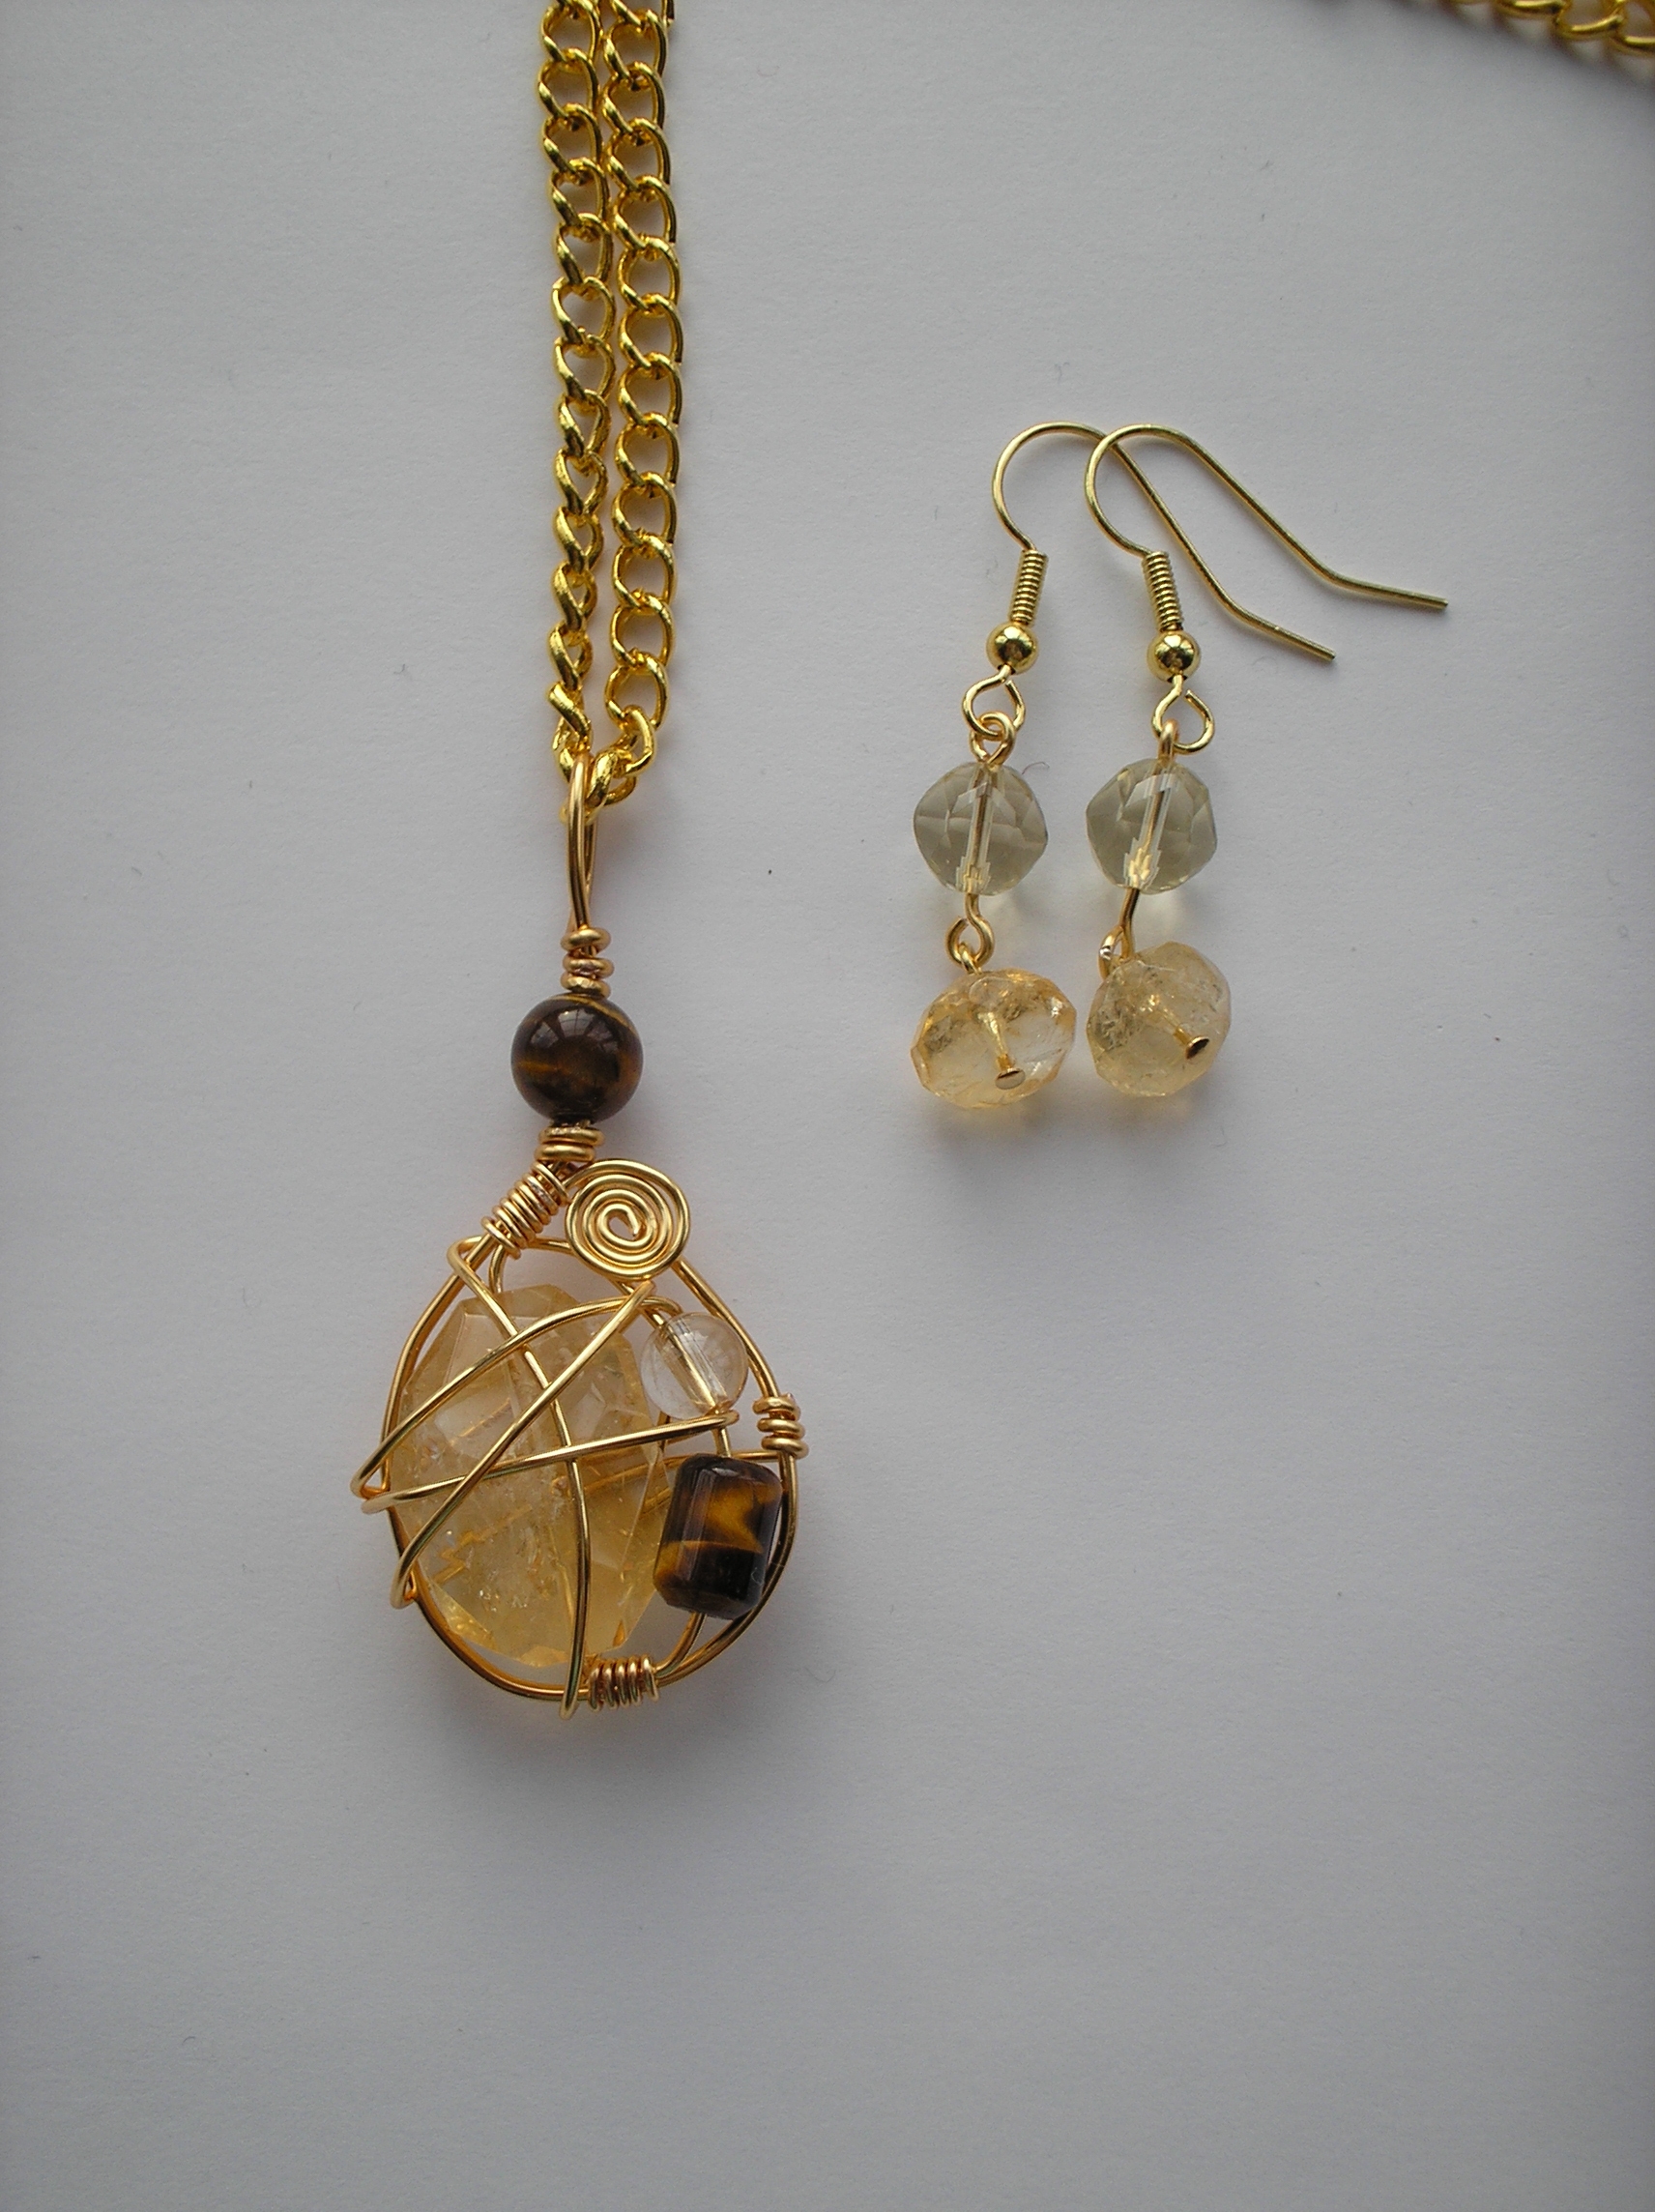 Citrine and Tigers Eye pendant and earrings